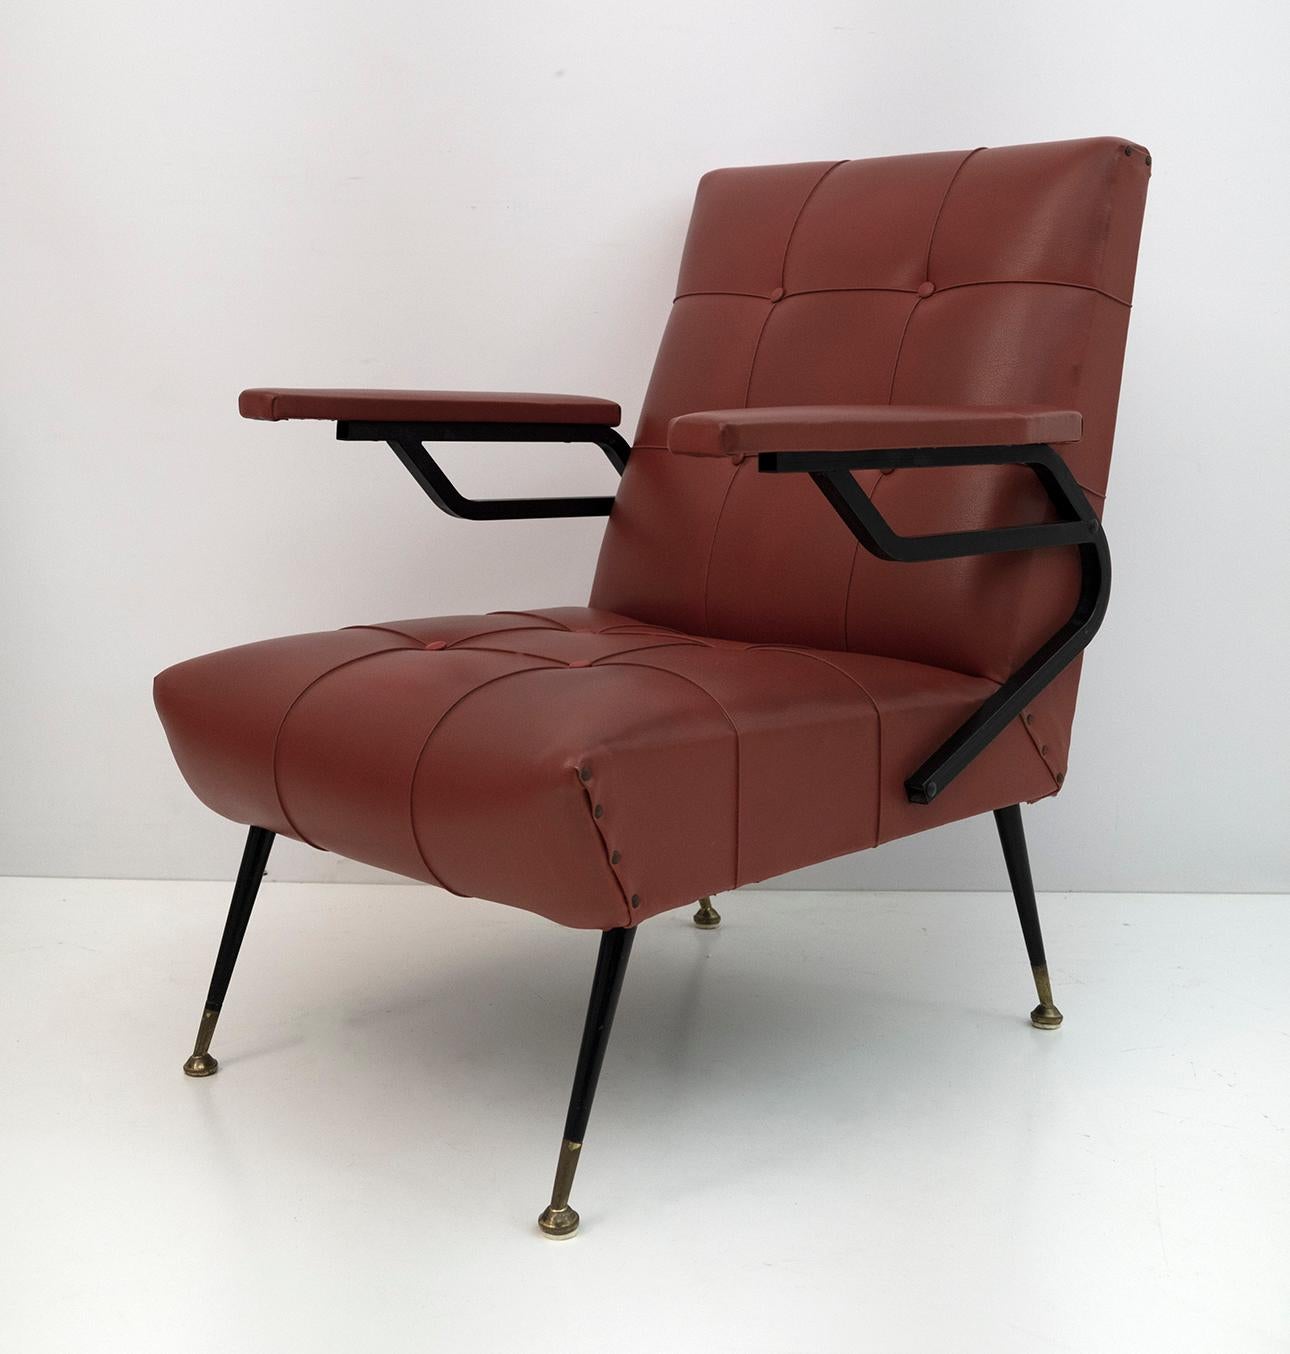 Mid-20th Century Mid-Century Modern Italian Faux Leather Small Armchair, 1960s For Sale